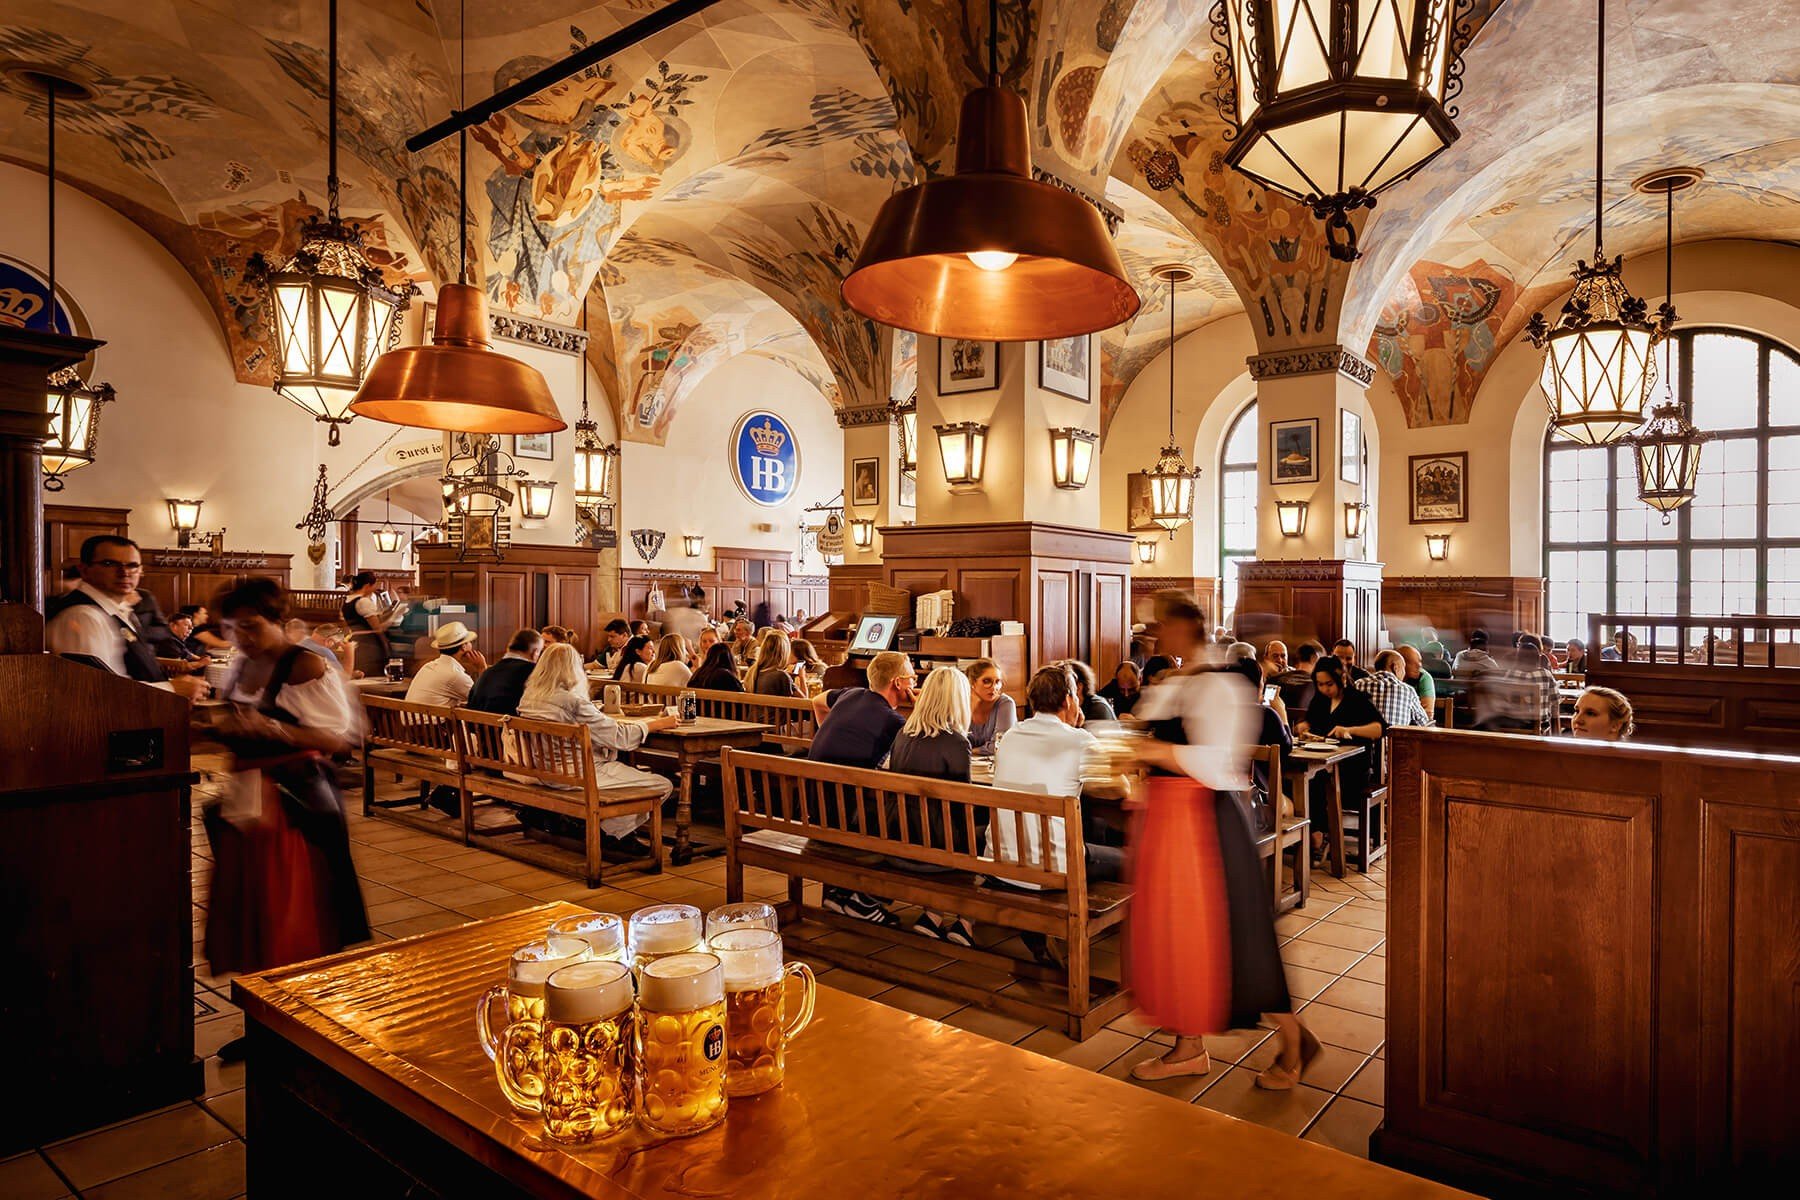 Hofbräu München brewery from Germany